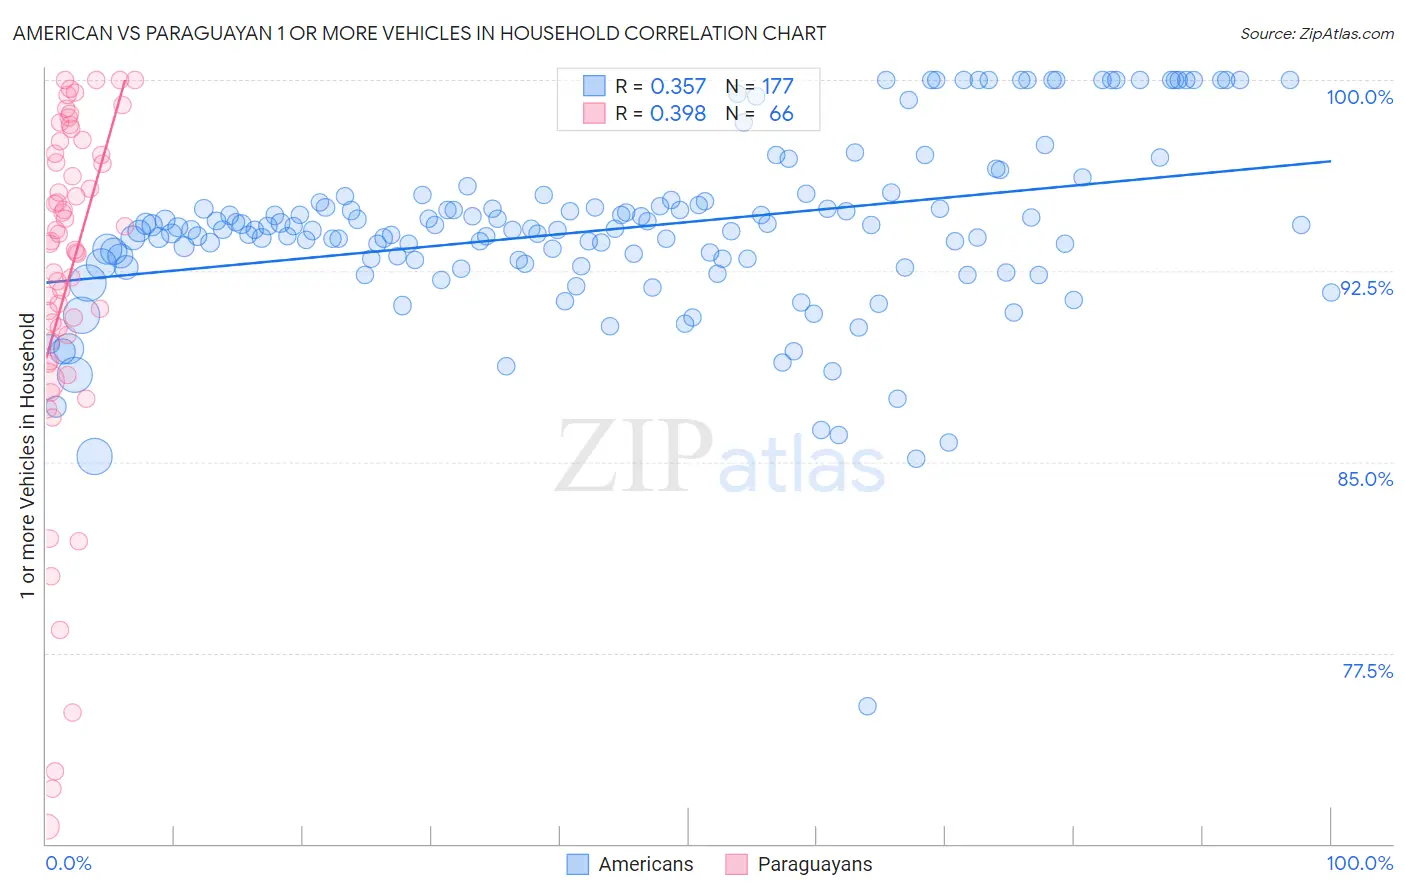 American vs Paraguayan 1 or more Vehicles in Household